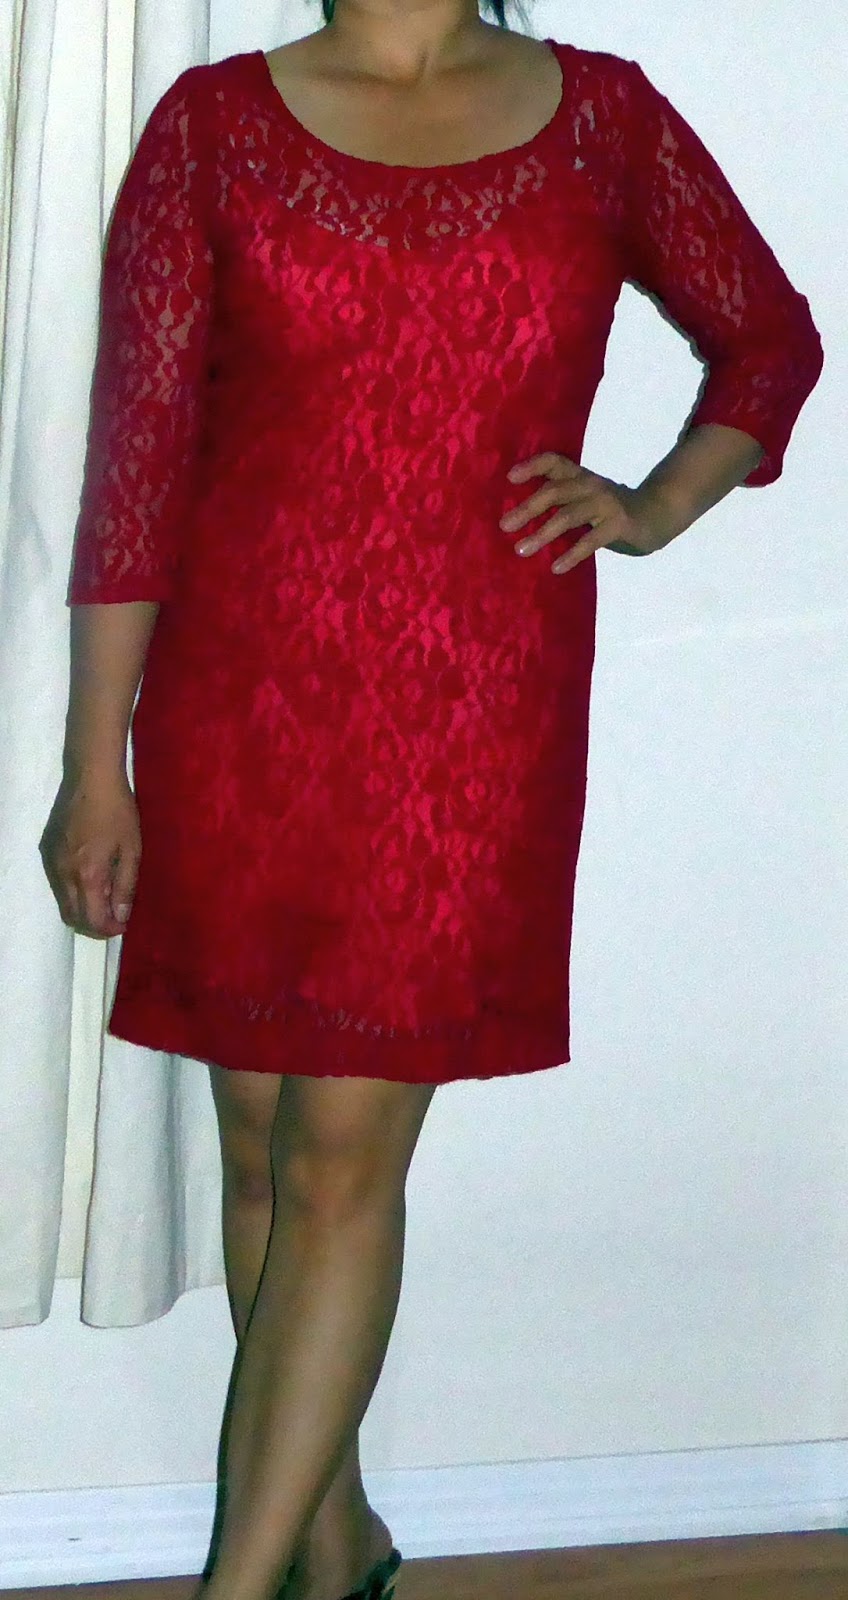 Frou Frou by lovenicky: Refashioned: Red lace dress got sleeves!